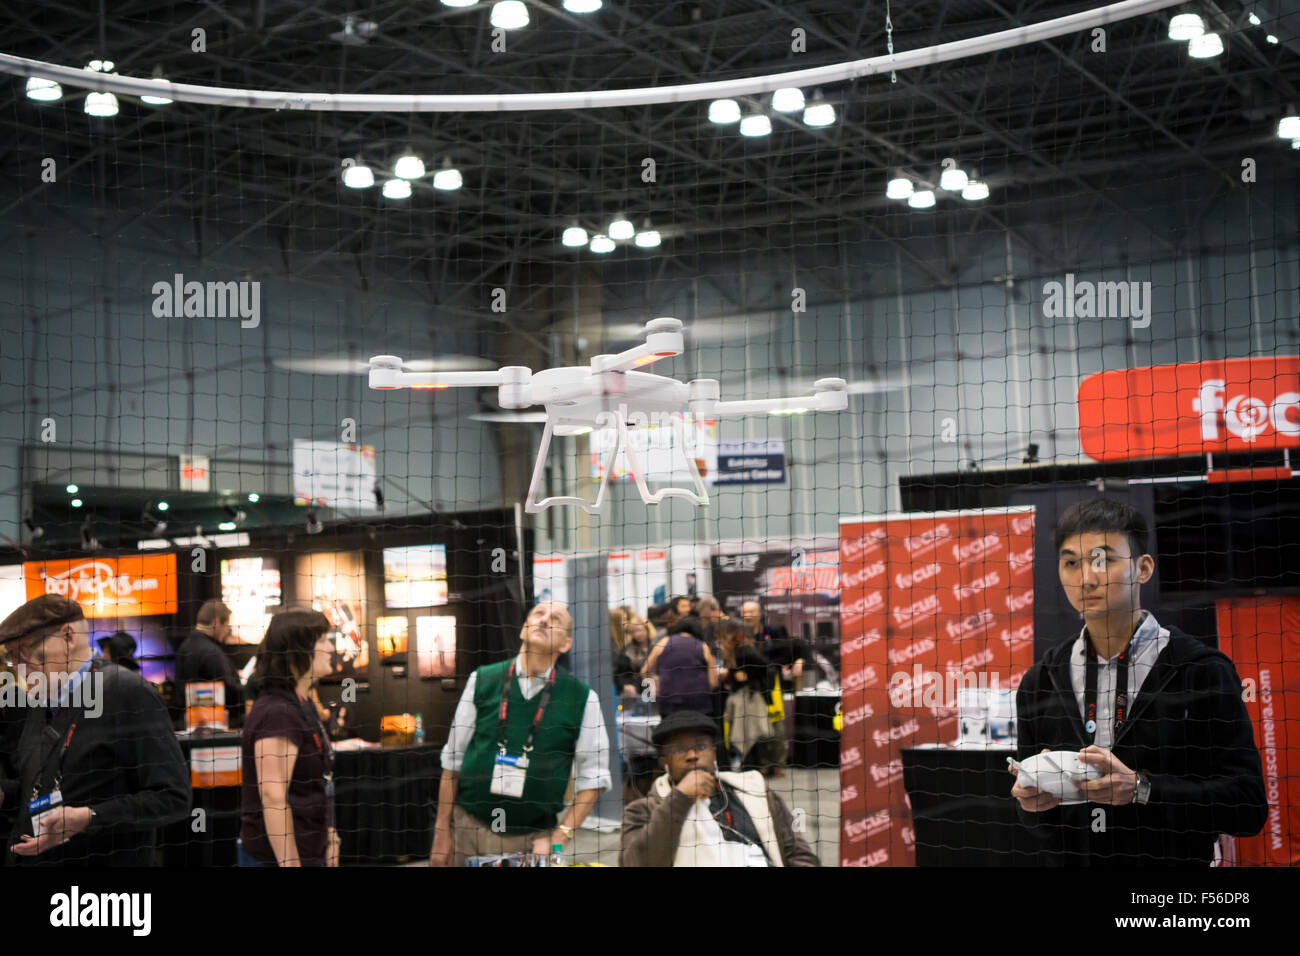 A commercial drone is demonstrated at a trade show in New York on Friday, October 23, 2015.  The US Dept. of Transportation has convened a task force to recommend parameters for drone registration, with a time frame that the regulations will be ready for Christmas. (© Richard B. Levine) Stock Photo